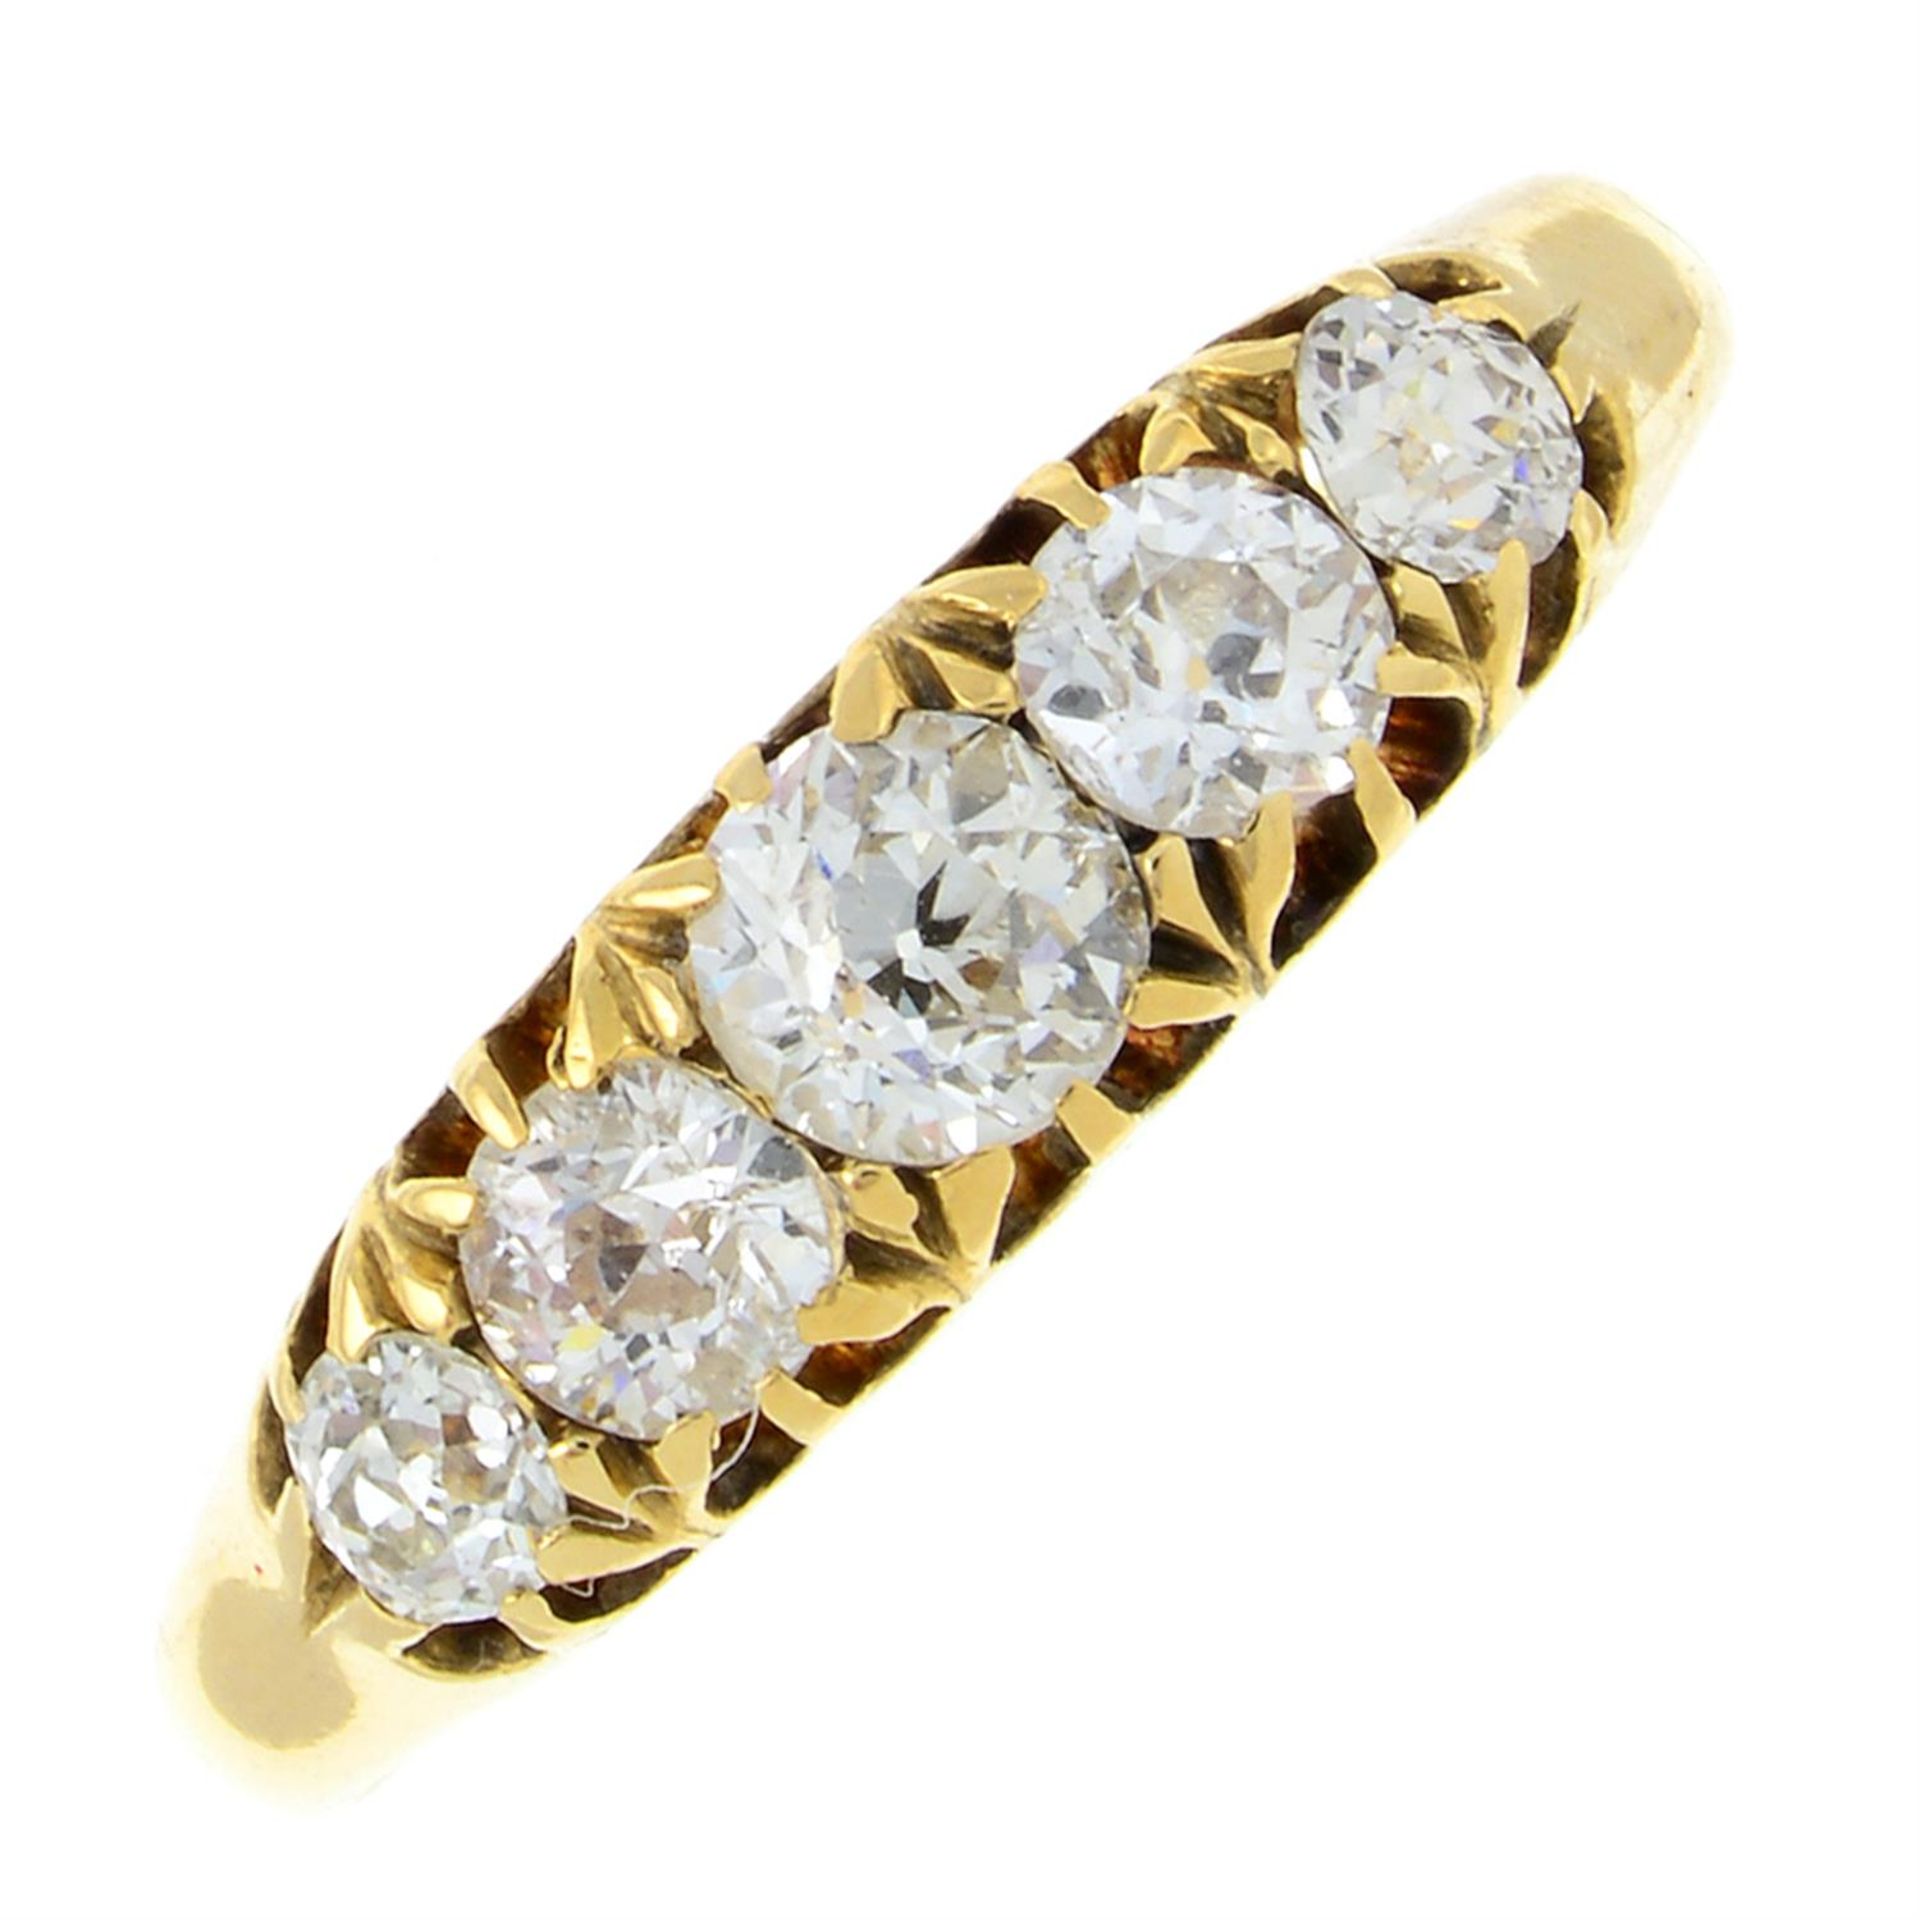 A late Victorian 18ct gold old-cut diamond five-stone ring.